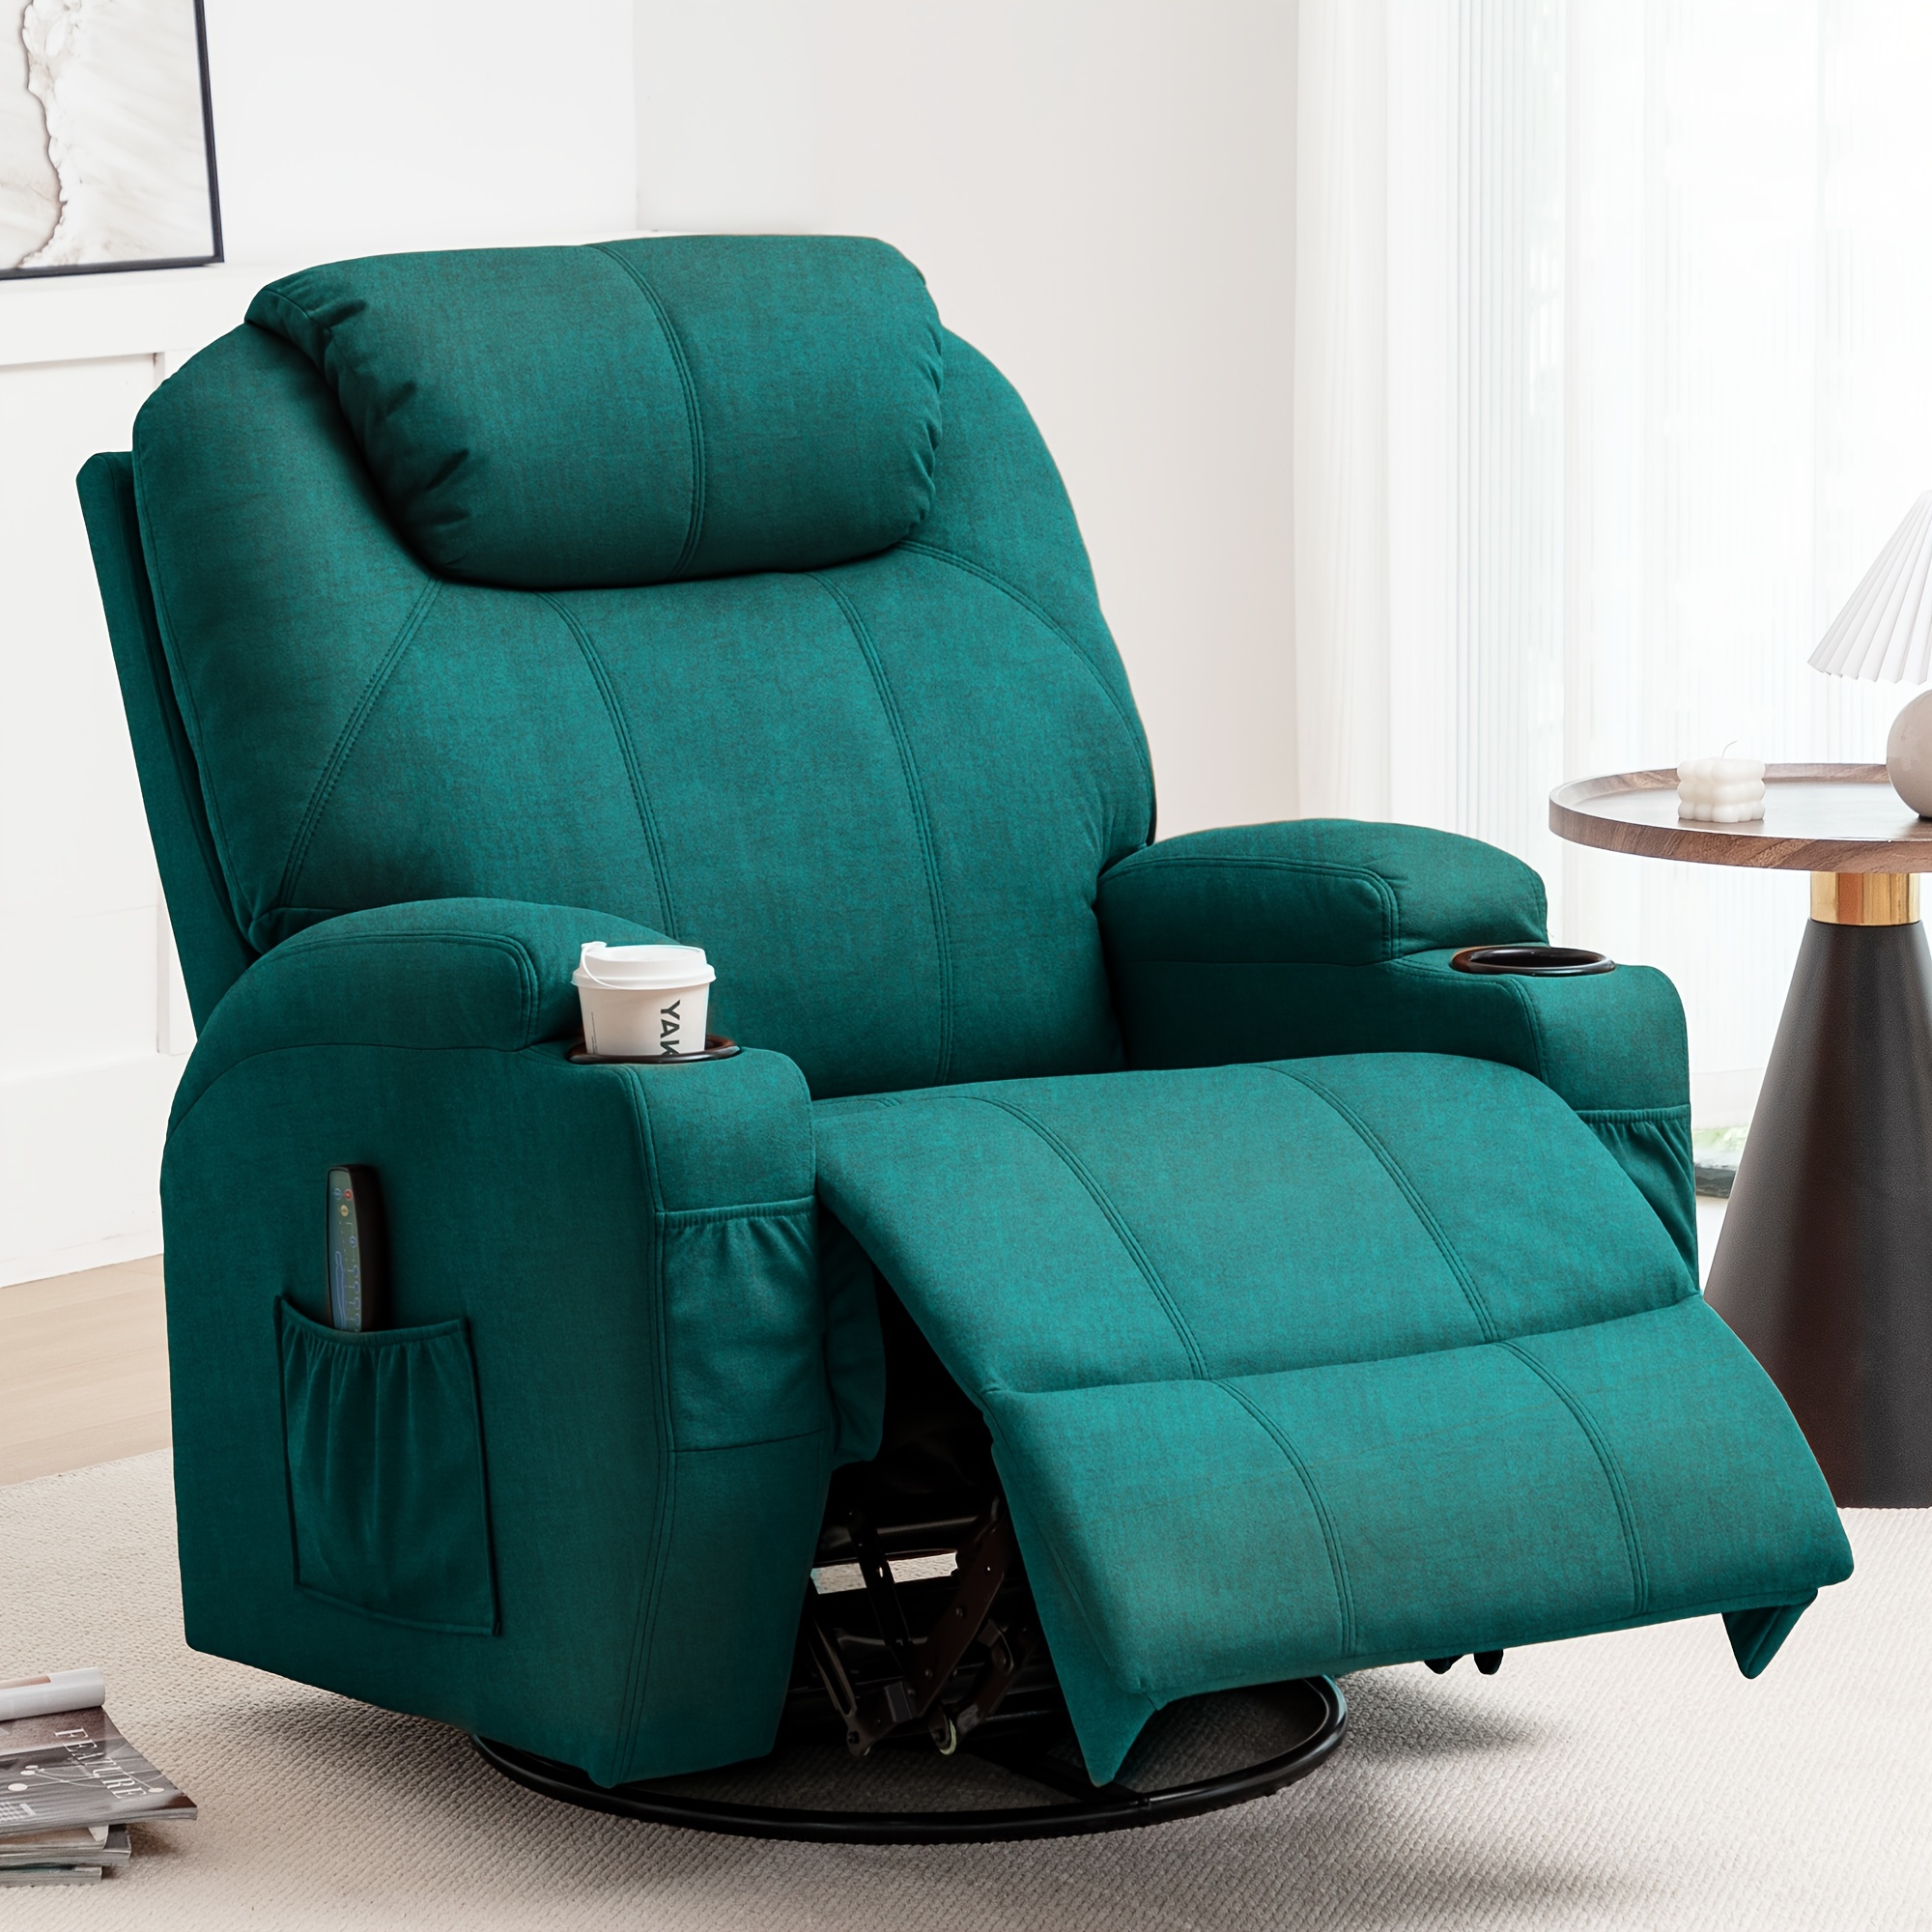 

Massage Swivel Rocker Recliner With Heat And Vibration Massage, Manual Rocking Recliner Living Room Chair